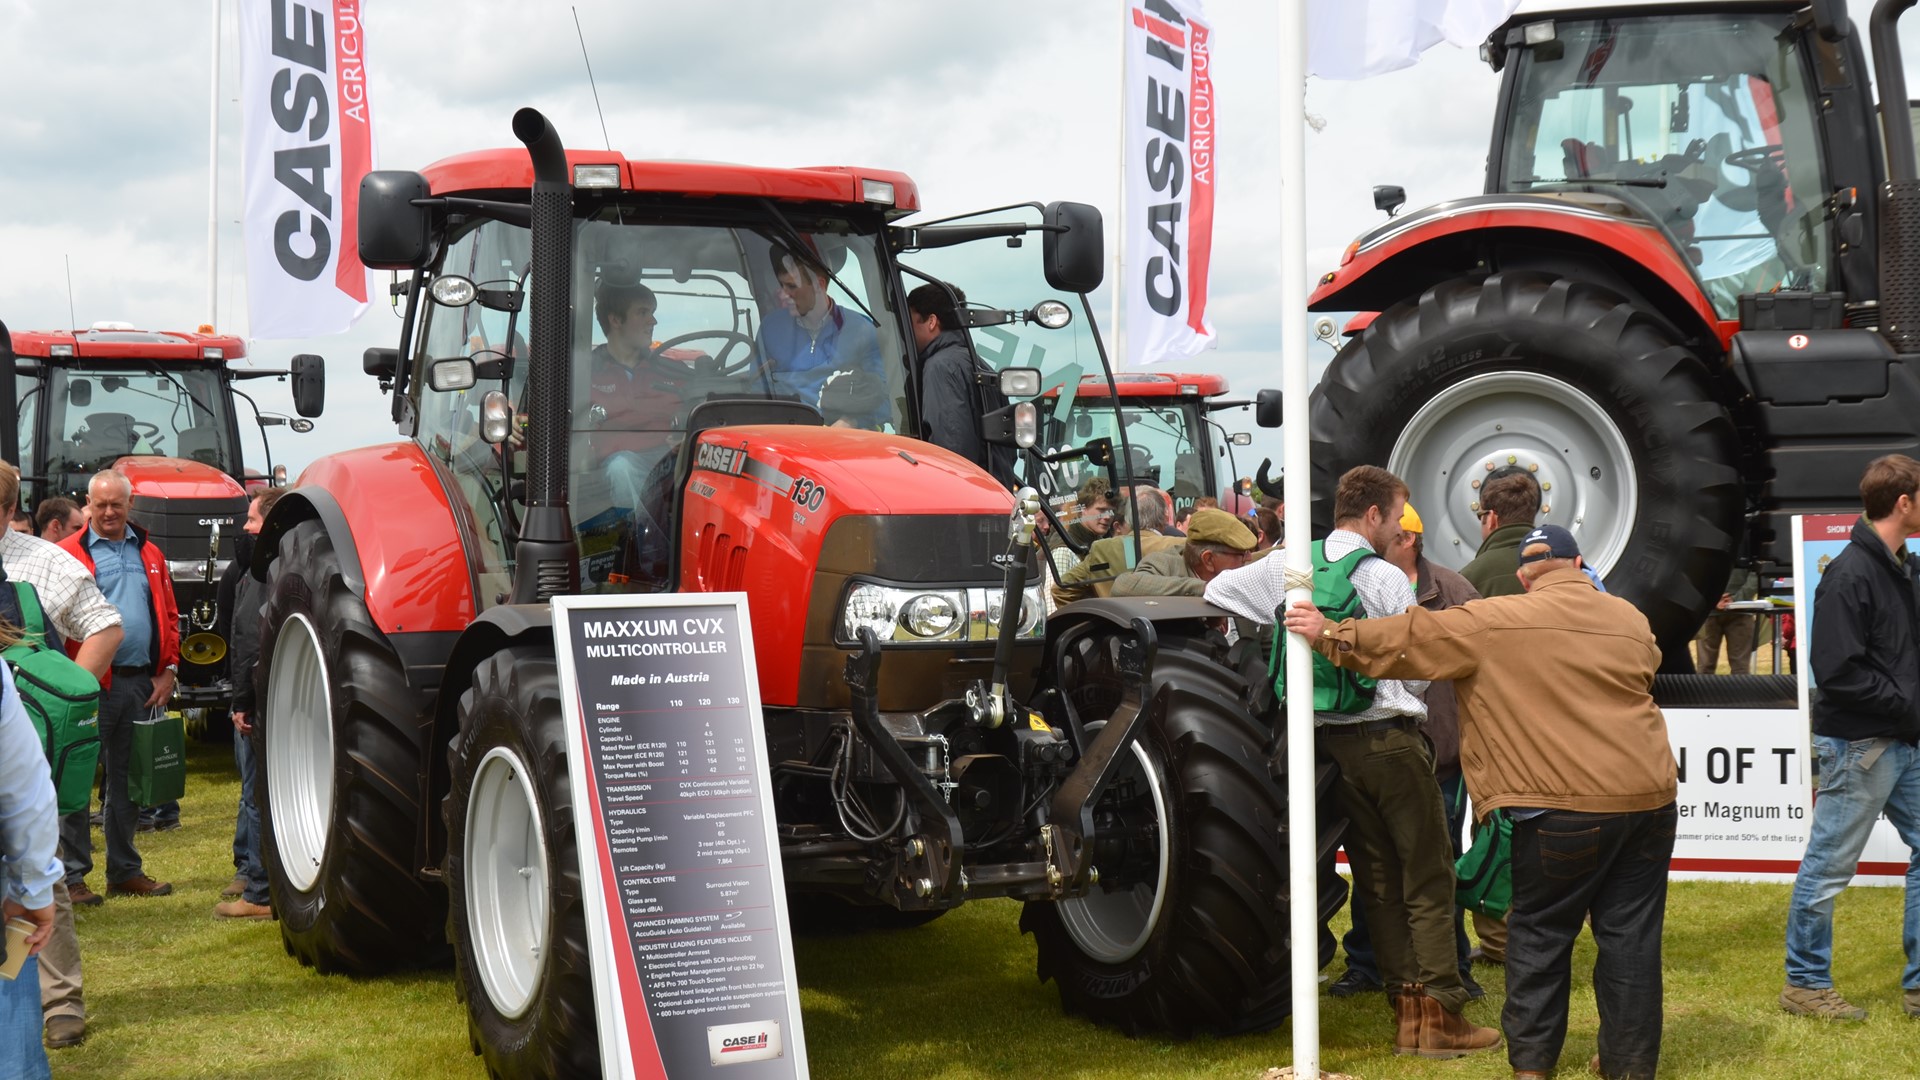 Maxxum CVX launched in the UK at cereals